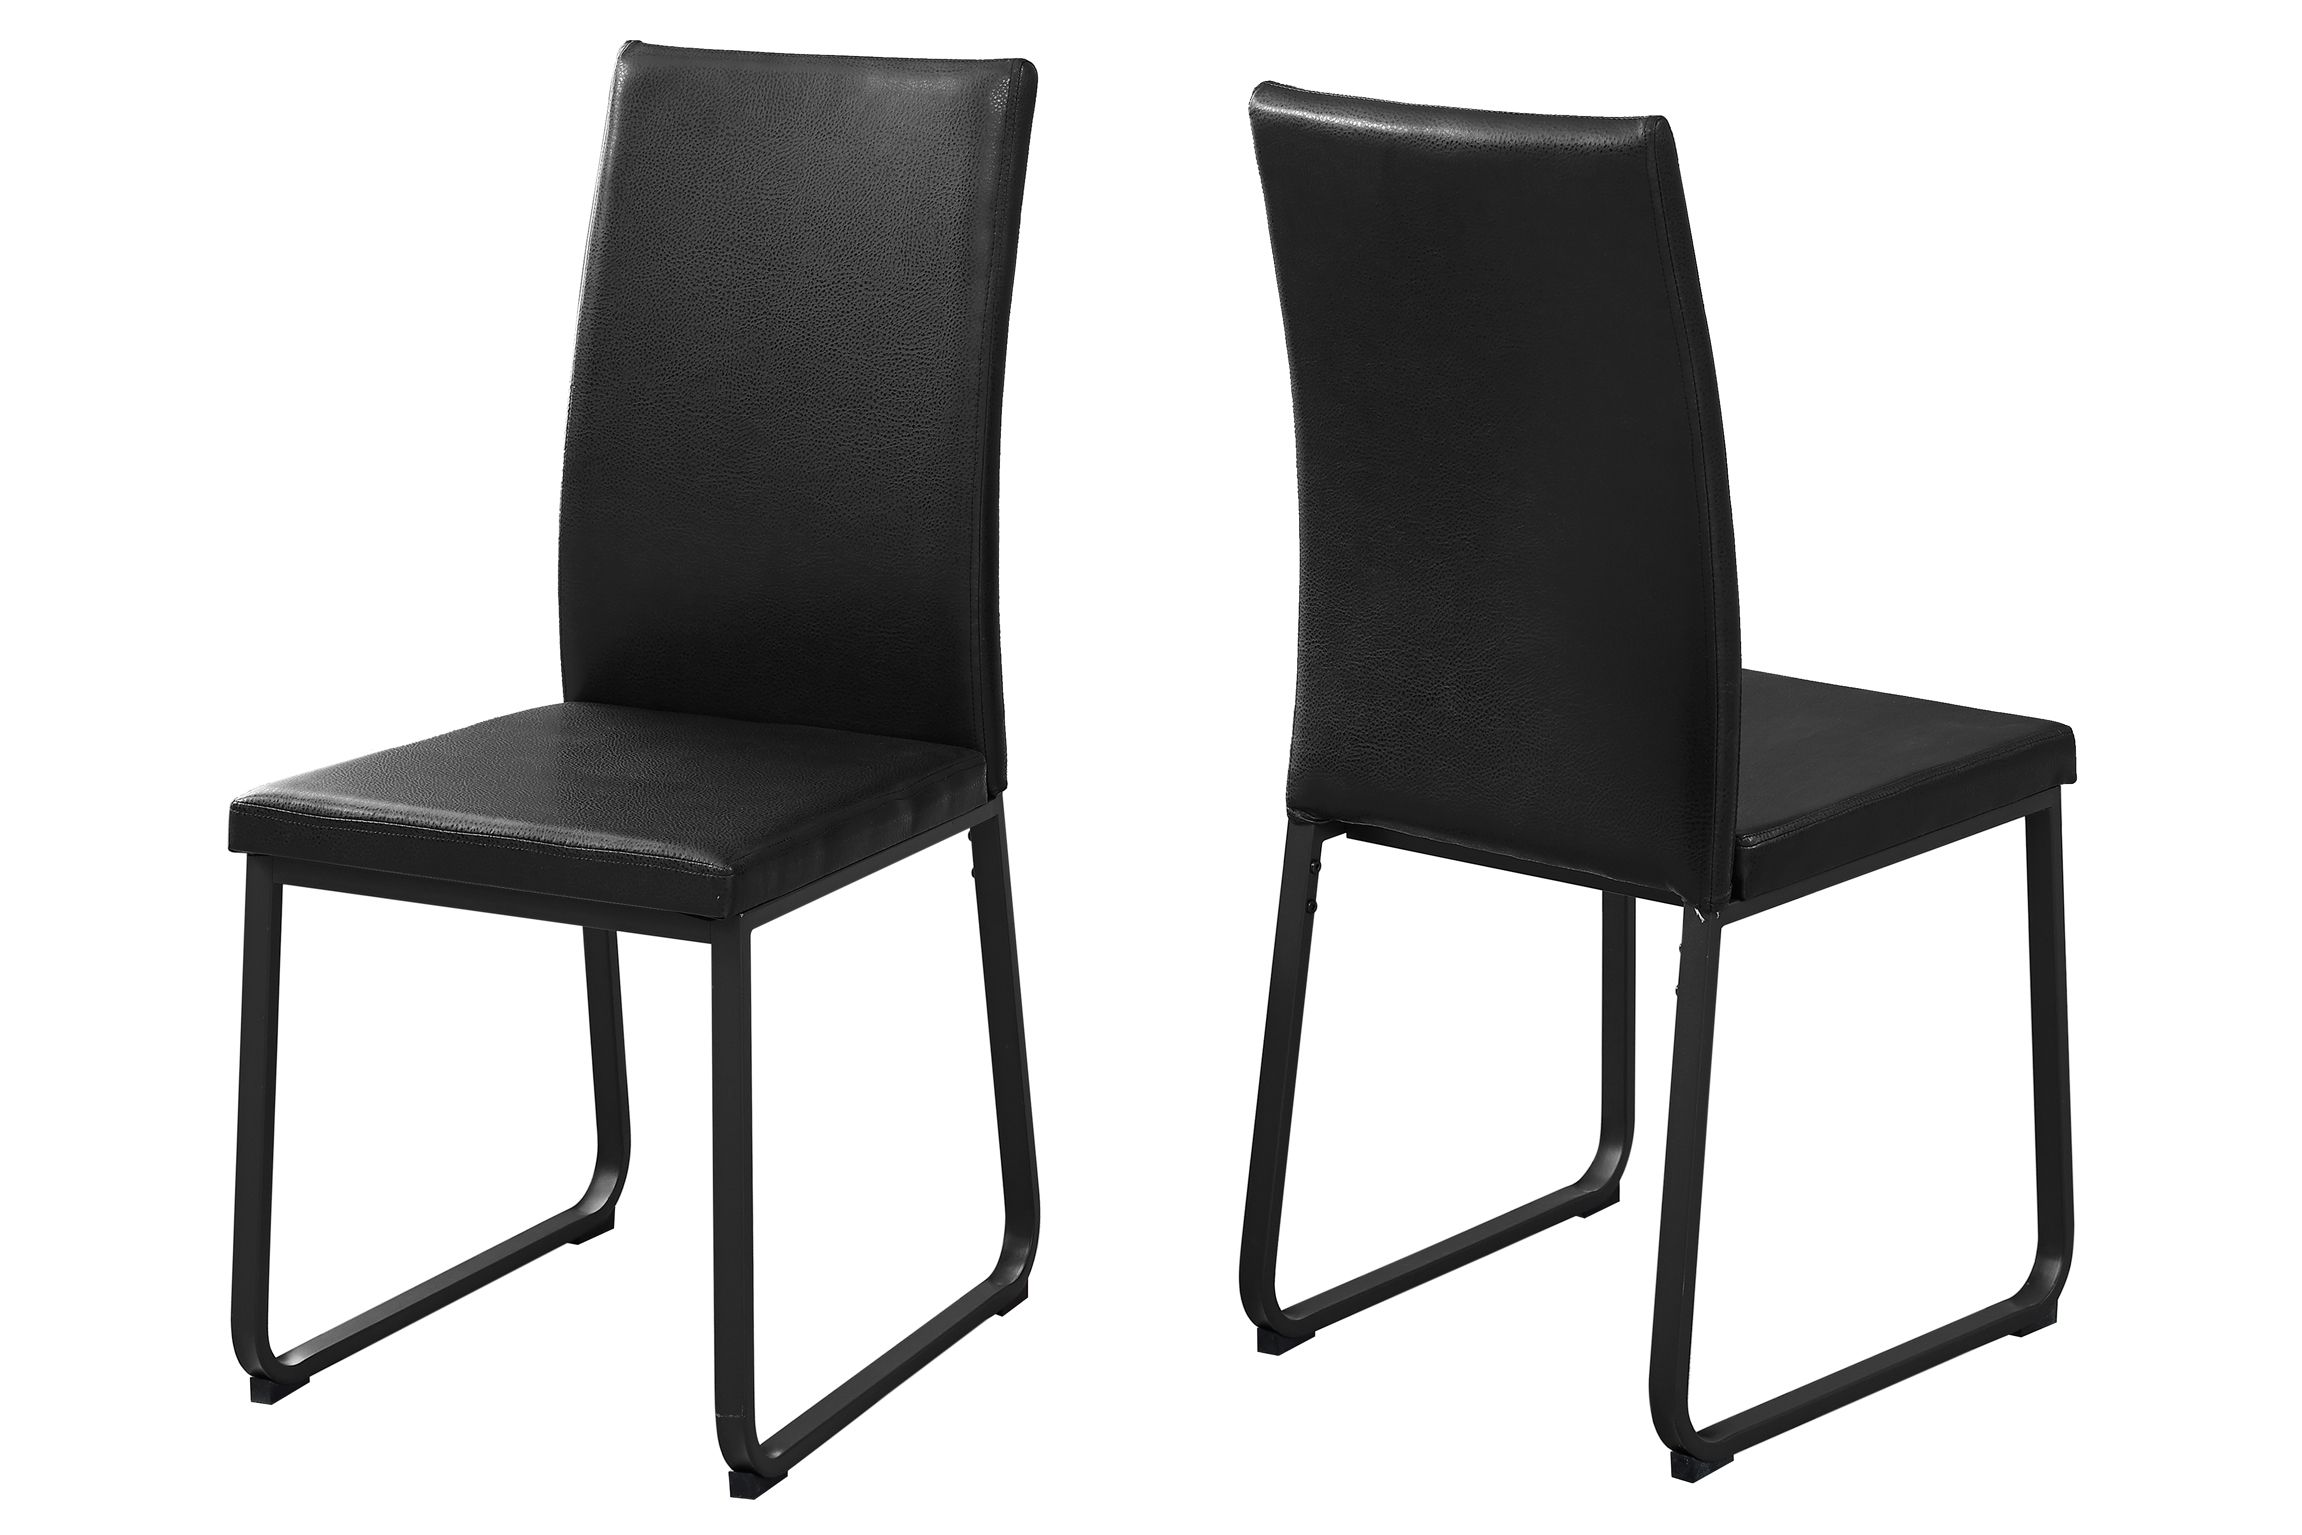 Black Faux Leather Modern Dining Chair Set Of 2 By Monarch